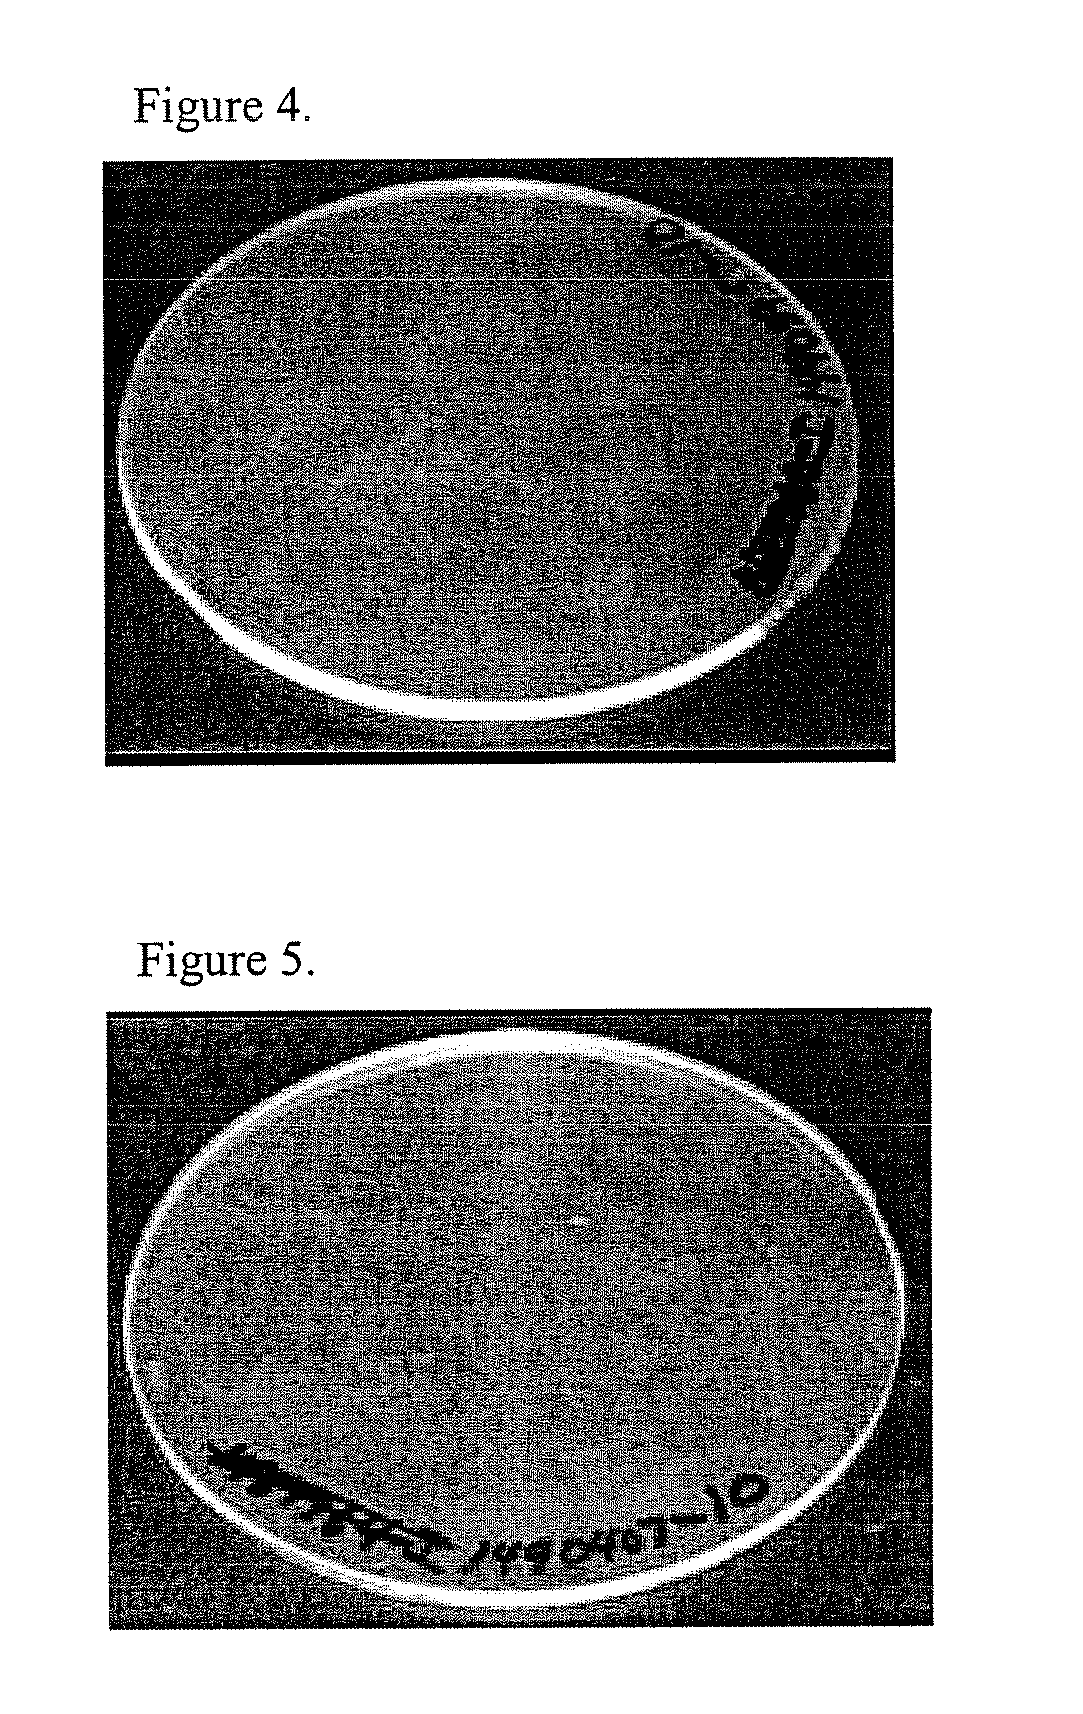 Thermoplastic composition, method of making, and articles formed therefrom